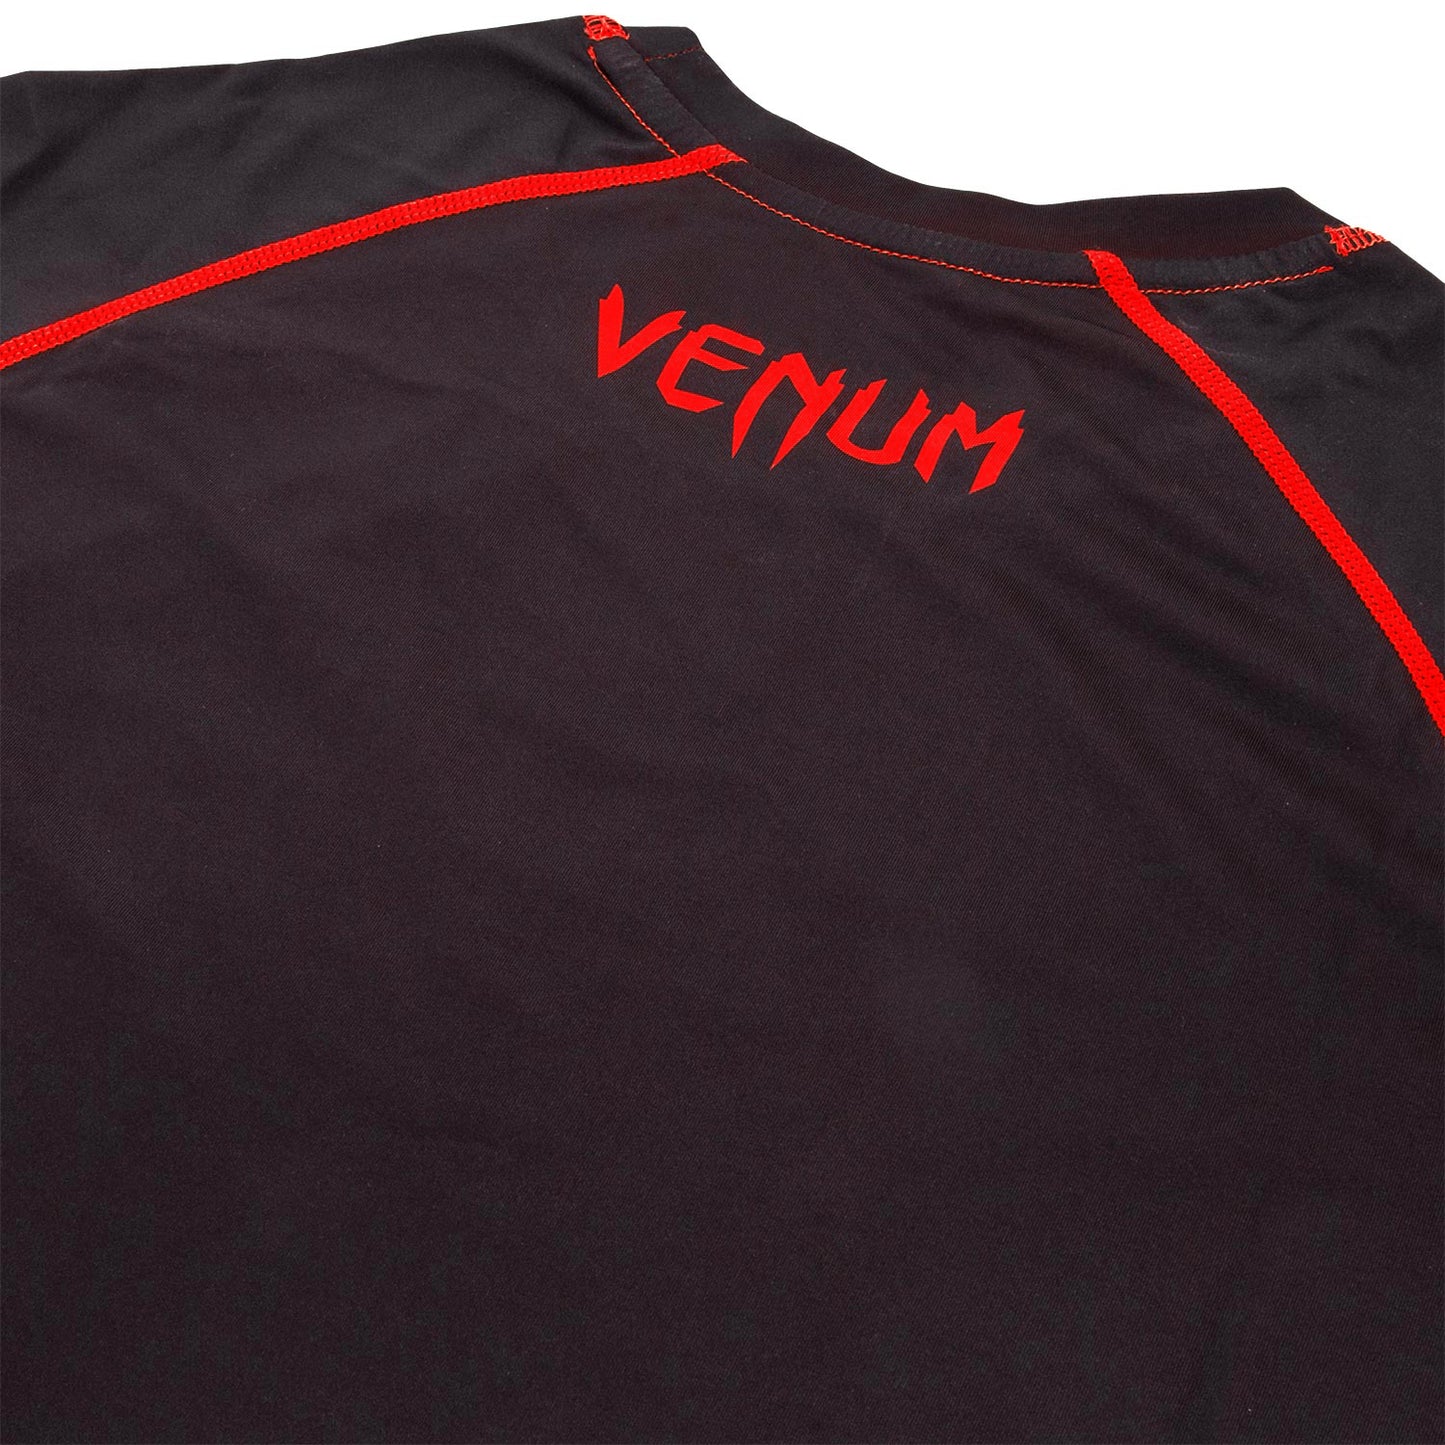 Venum Contender 3.0 Compression T-shirt - Long Sleeves - Black/Red